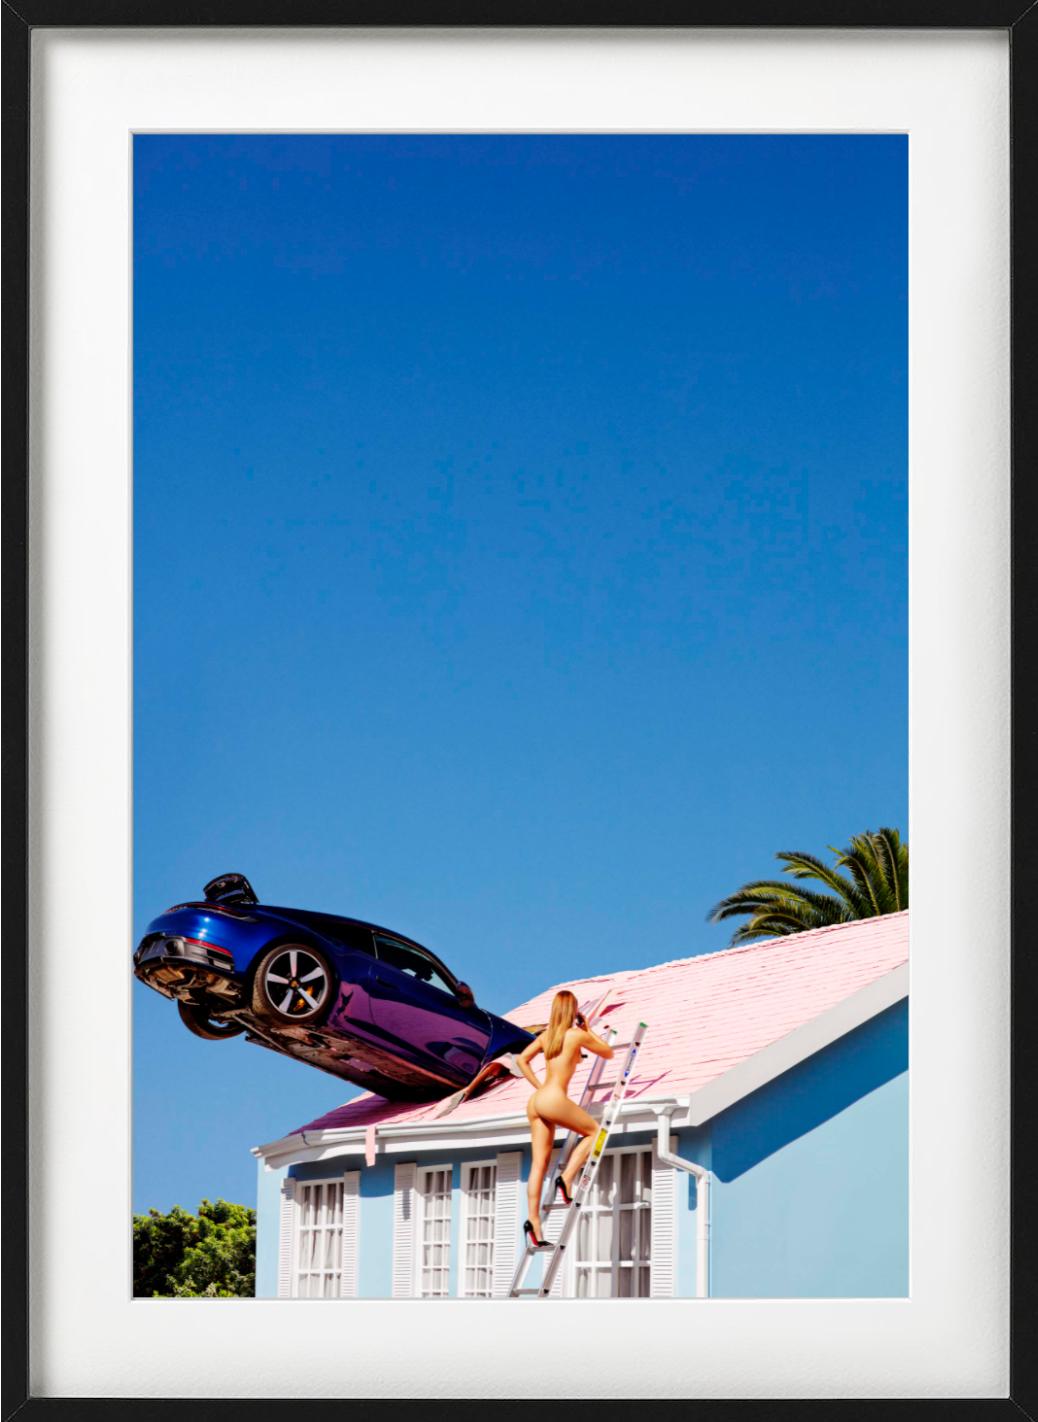 Rooftop Parking - nunde on a rooftop with purple car, fine art photography, 2012 - Contemporary Photograph by Tony Kelly